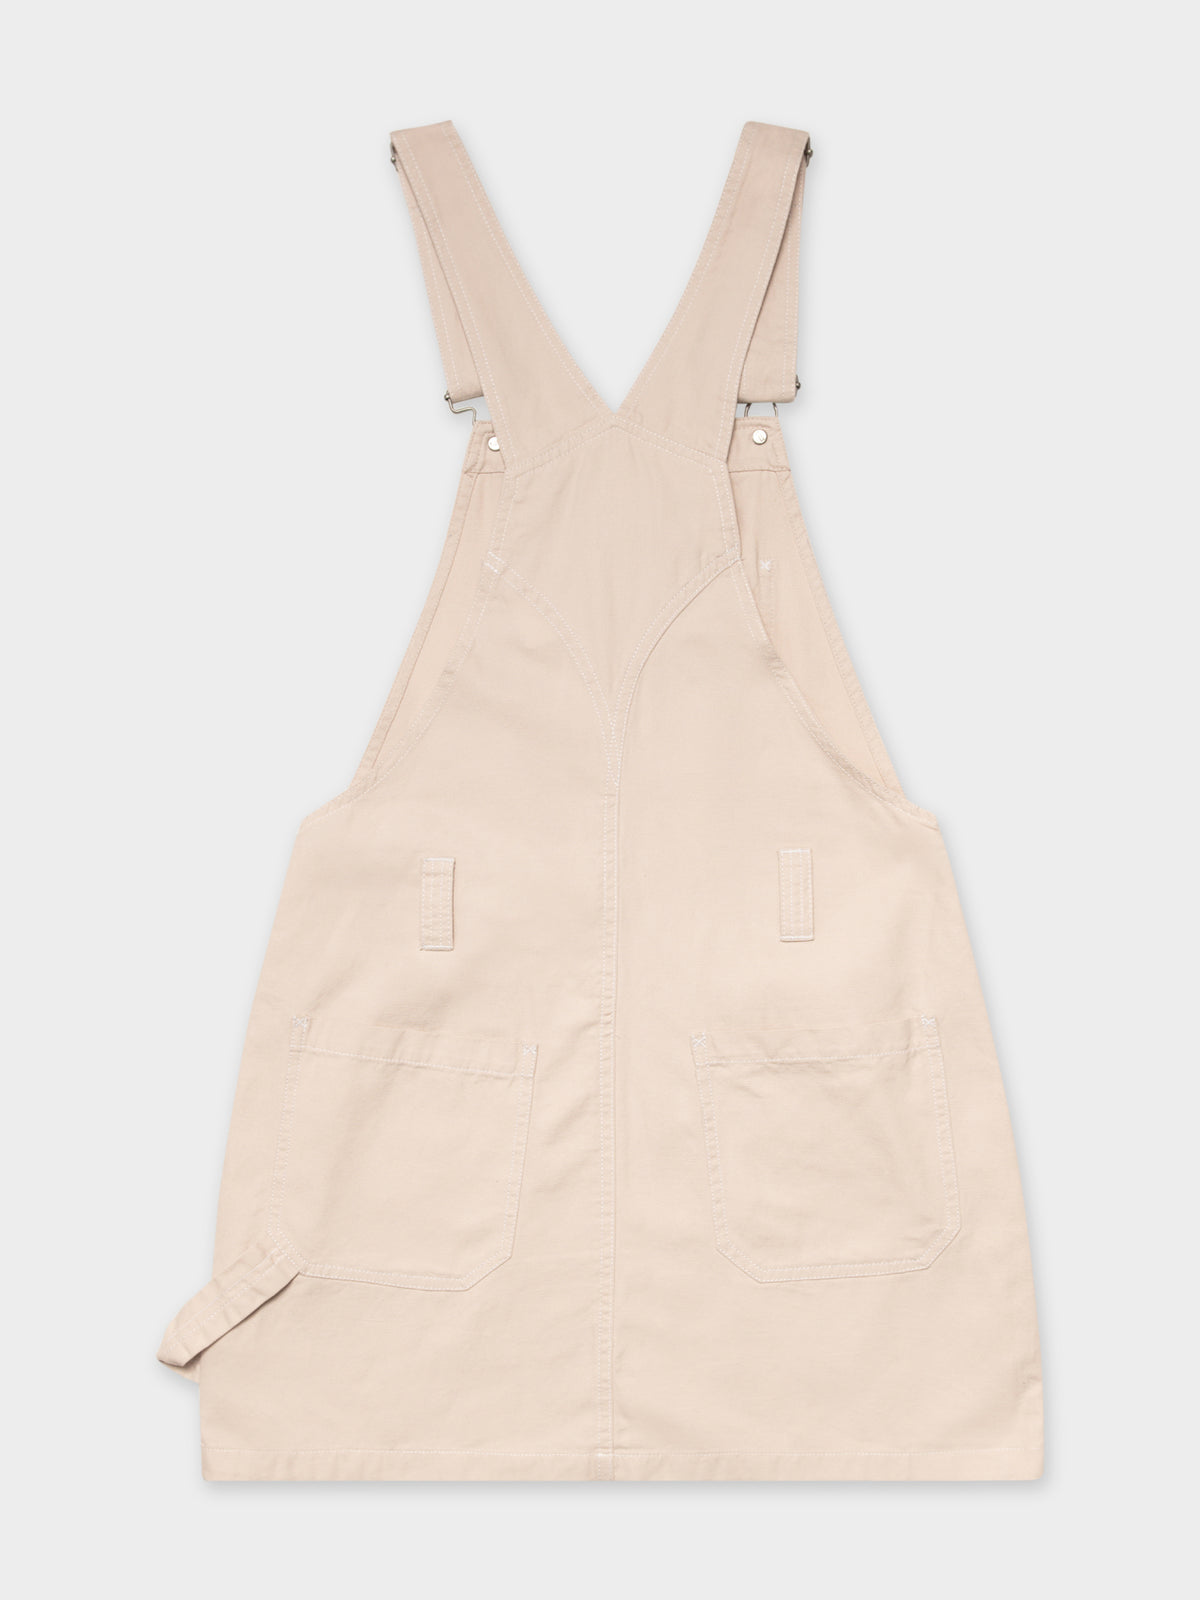 Dungaree Dress in Smooth Stone